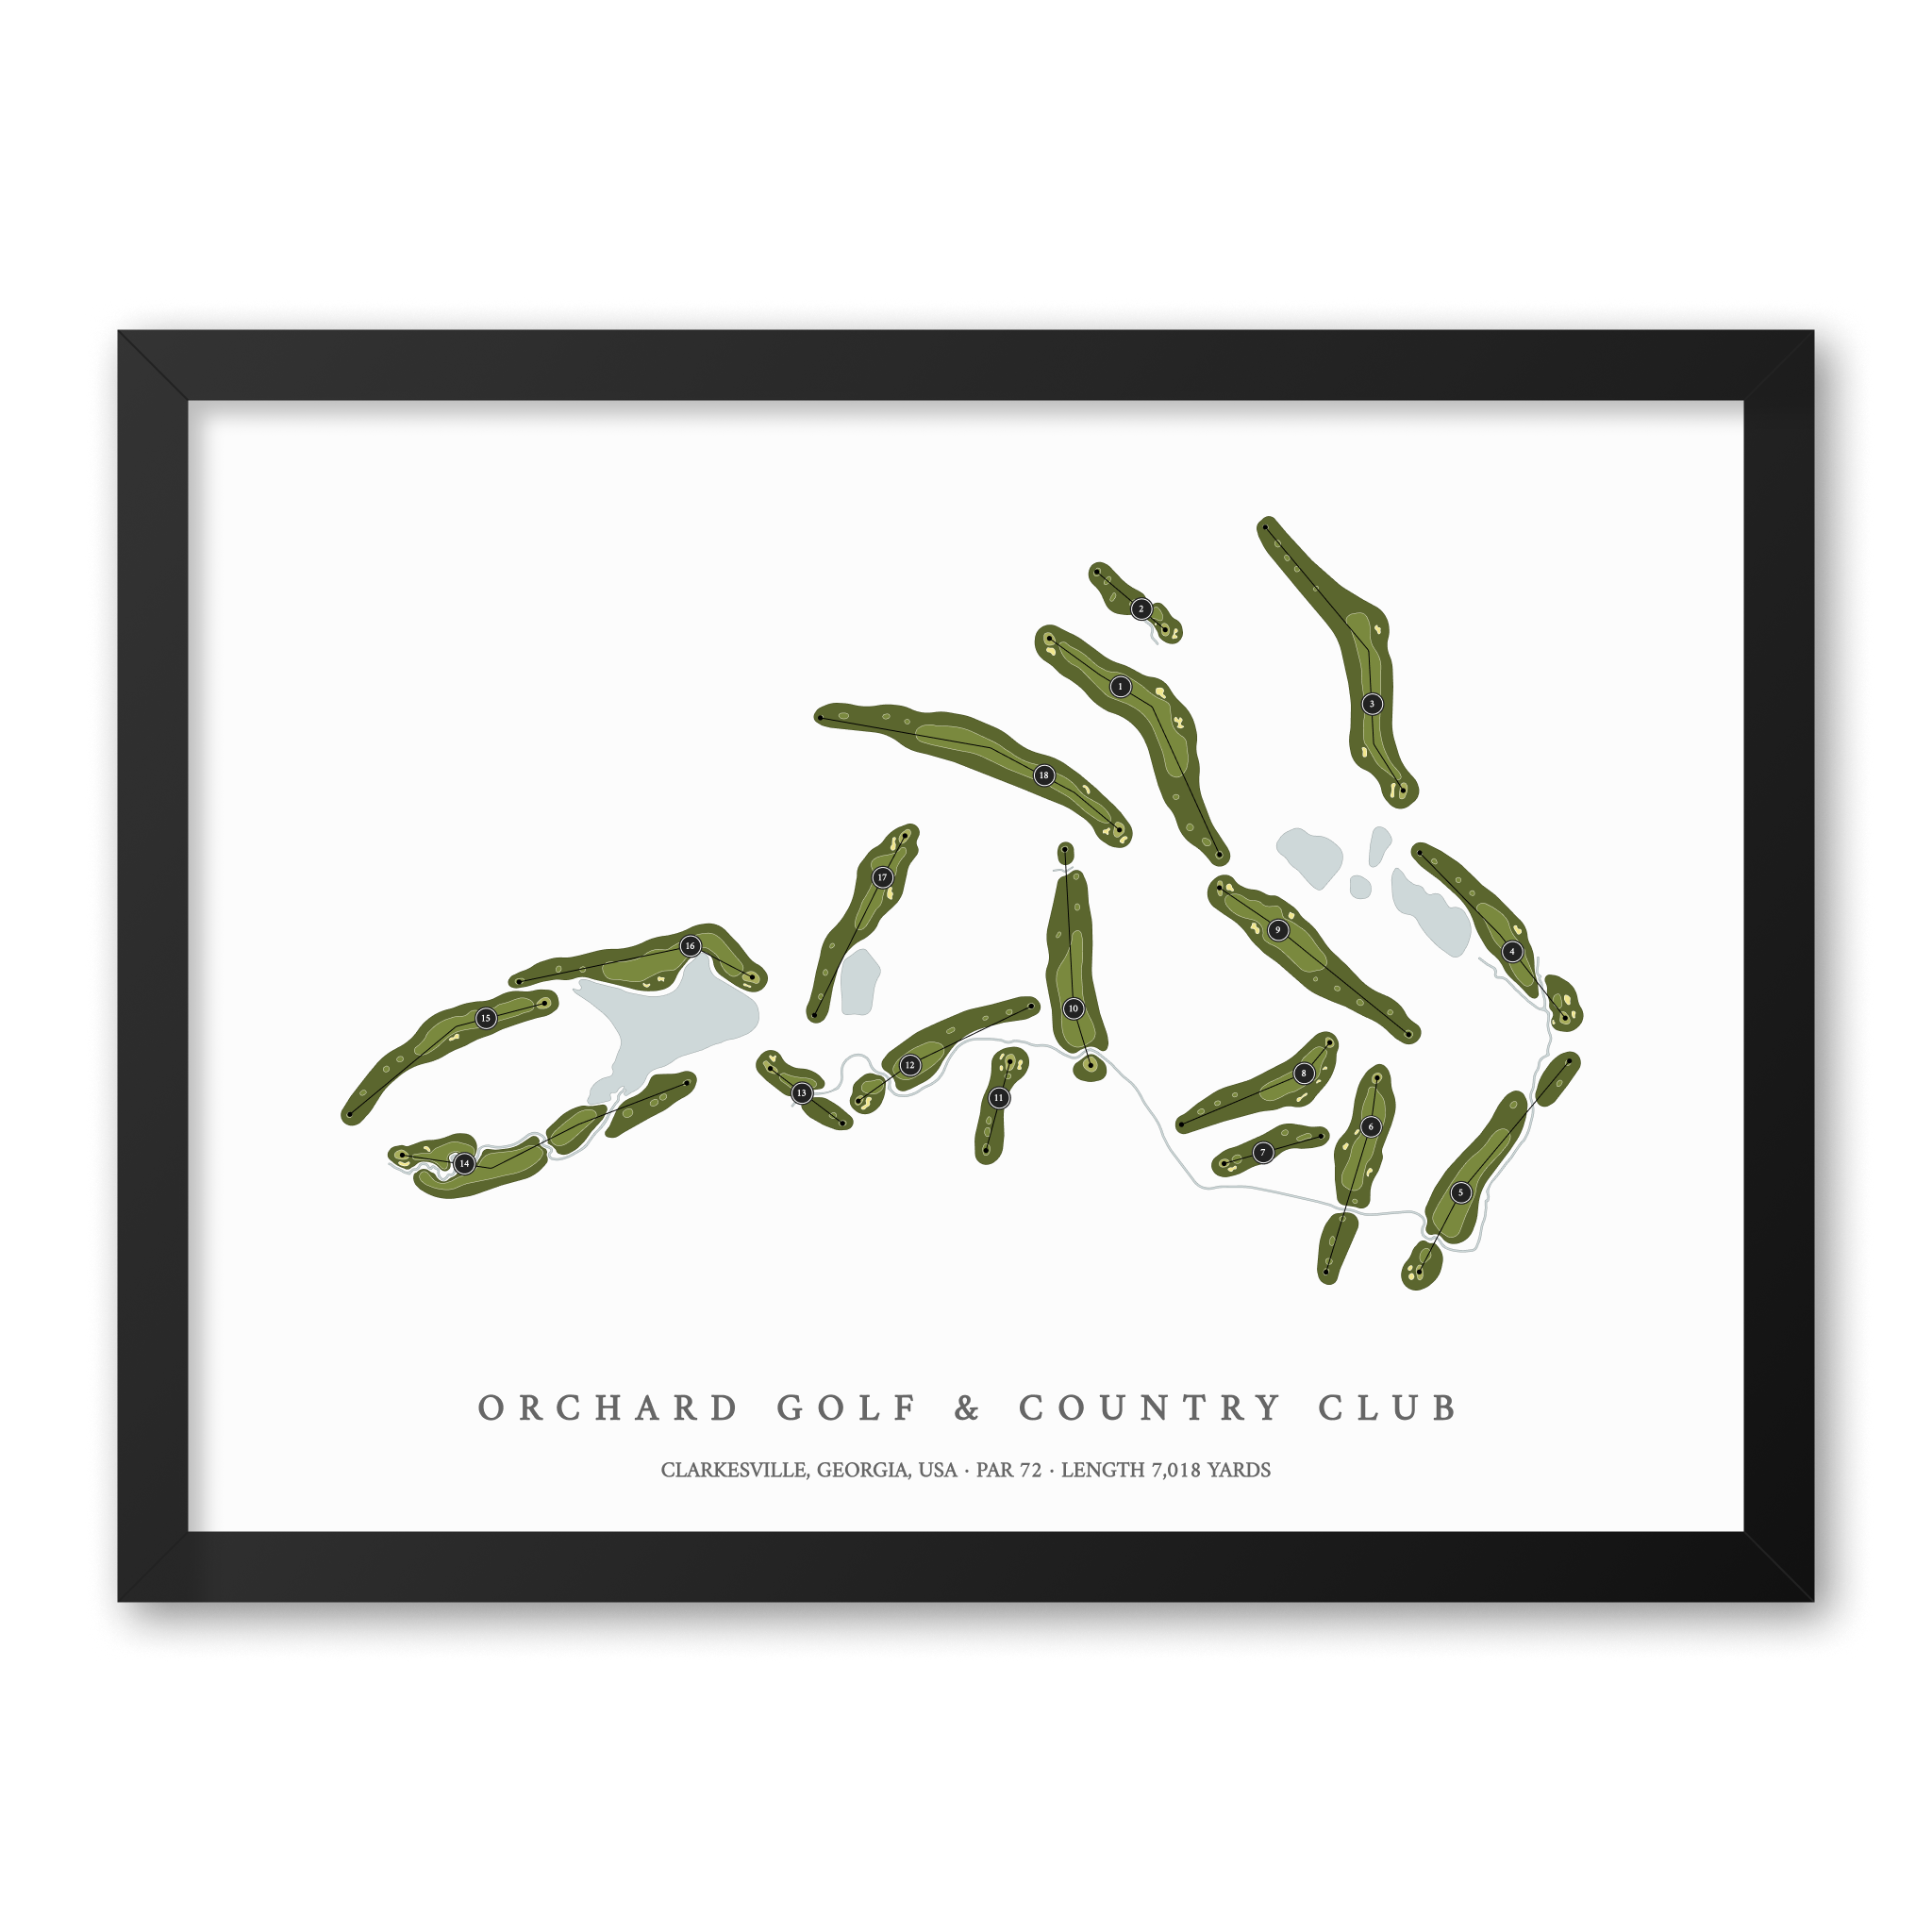 Orchard Golf & Country Club | Golf Course Map | Black Frame